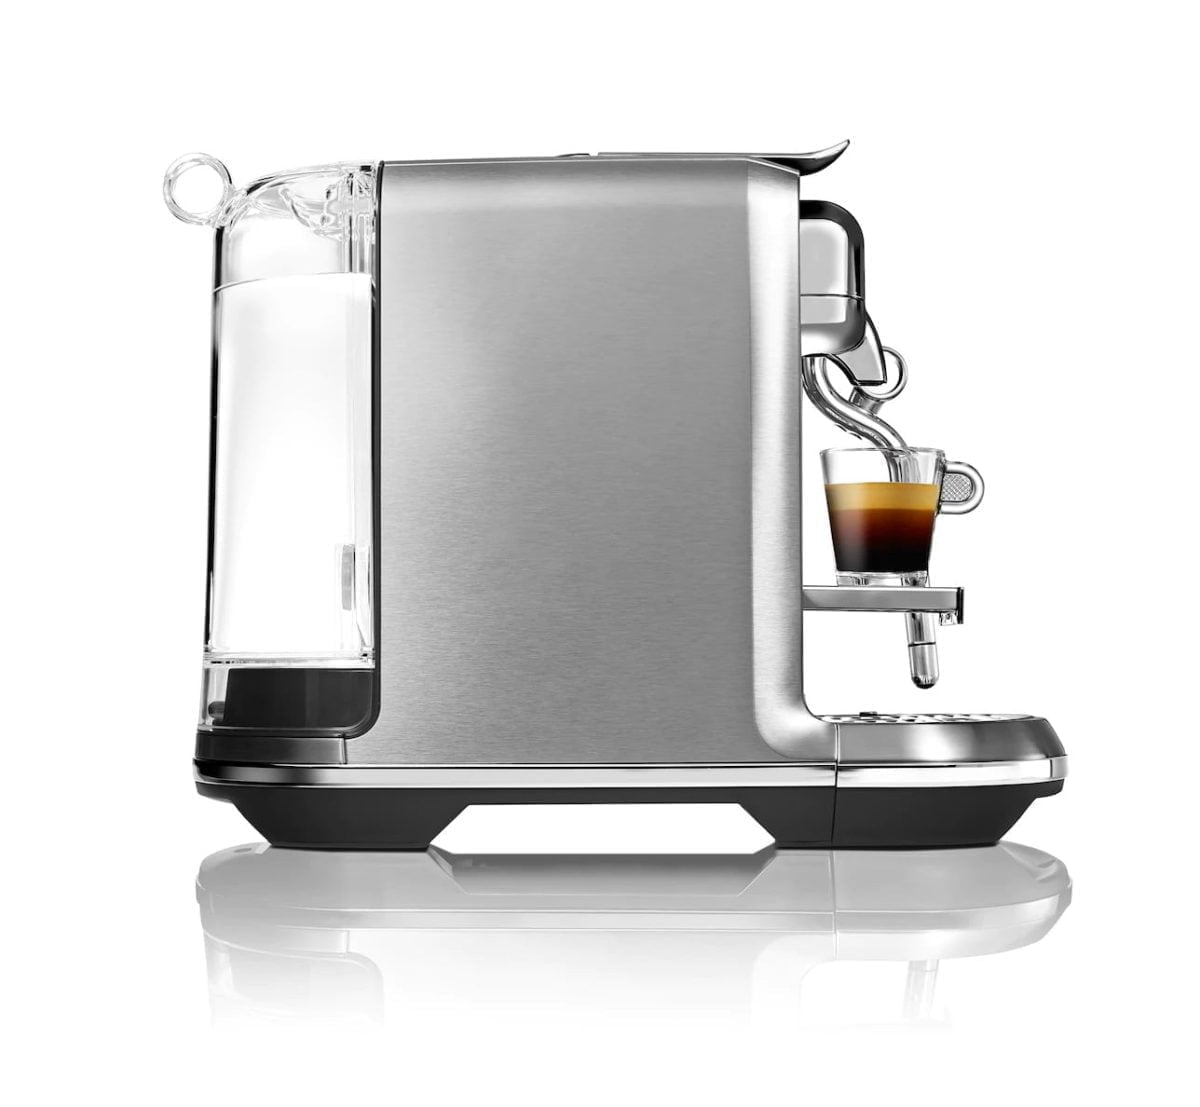 M 0428 Pdp Background Side Nespresso Https://Www.youtube.com/Watch?V=0Qmamxmrnhu The Nespresso Creatista Plus Gives You The Ability To Easily Create Personalized Café-Style Quality Coffee At Home. With A Stylish Sleek Design And Stainless Steel Finish, The Creatista Plus Has A 3 Second Heat Up Time, 8 Texture Levels And 11 Milk Temperature Settings. Each Machine Includes A Stainless Steel Milk Jug. Available Settings: 3 Coffee Volume Settings (From 25 To 150 Ml), 8 Milk Texture/Froth Settings (From 2 To 30 Mm) And 9 Milk Temperature Settings (From 55 To 75C). Comes With A 480Ml Stainless Steel Milk Jug, Pop Out Cup Support, Removable Drip Grid And Removable Drip Tray. &Lt;Ul&Gt; &Lt;Li&Gt;Coffee Options Include: Espresso, Cappuccino, Latte, Ristretto, Lungo, And Latte Macchiato.&Lt;/Li&Gt; &Lt;Li&Gt;Compatible With Nespresso Original Capsules.&Lt;/Li&Gt; &Lt;Li&Gt;Recyclable Pods.&Lt;/Li&Gt; &Lt;Li&Gt;Strength Selector - To Tailor The Strength Of The Coffee To Your Taste.&Lt;/Li&Gt; &Lt;Li&Gt;Milk Frother Included.&Lt;/Li&Gt; &Lt;Li&Gt;Incorporated Crema Device.&Lt;/Li&Gt; &Lt;Li&Gt;19 Bar Pump Pressure.&Lt;/Li&Gt; &Lt;Li&Gt;Water Capacity 1.5 Litres.&Lt;/Li&Gt; &Lt;Li&Gt;Water Level Gauge.&Lt;/Li&Gt; &Lt;Li&Gt;Transparent Removable Water Tank.&Lt;/Li&Gt; &Lt;Li&Gt;Adjustable Cup Stand For Any Size Mug.&Lt;/Li&Gt; &Lt;Li&Gt;Removable Drip Tray.&Lt;/Li&Gt; &Lt;Li&Gt;Magnetic Pod Holder.&Lt;/Li&Gt; &Lt;Li&Gt;Auto Shut-Off After 20 Minutes.&Lt;/Li&Gt; &Lt;Li&Gt;Descale Warning Feature.&Lt;/Li&Gt; &Lt;Li&Gt;Dishwasher Safe Parts For Effortless Cleaning.&Lt;/Li&Gt; &Lt;/Ul&Gt; With 14 Capsules &Lt;H4&Gt;Warranty : 1 Year (Shipping Not Included)&Lt;/H4&Gt; Nespresso Nespresso Creatista Plus Pod Coffee Machine By Sage - Steel (With 14 Capsules)